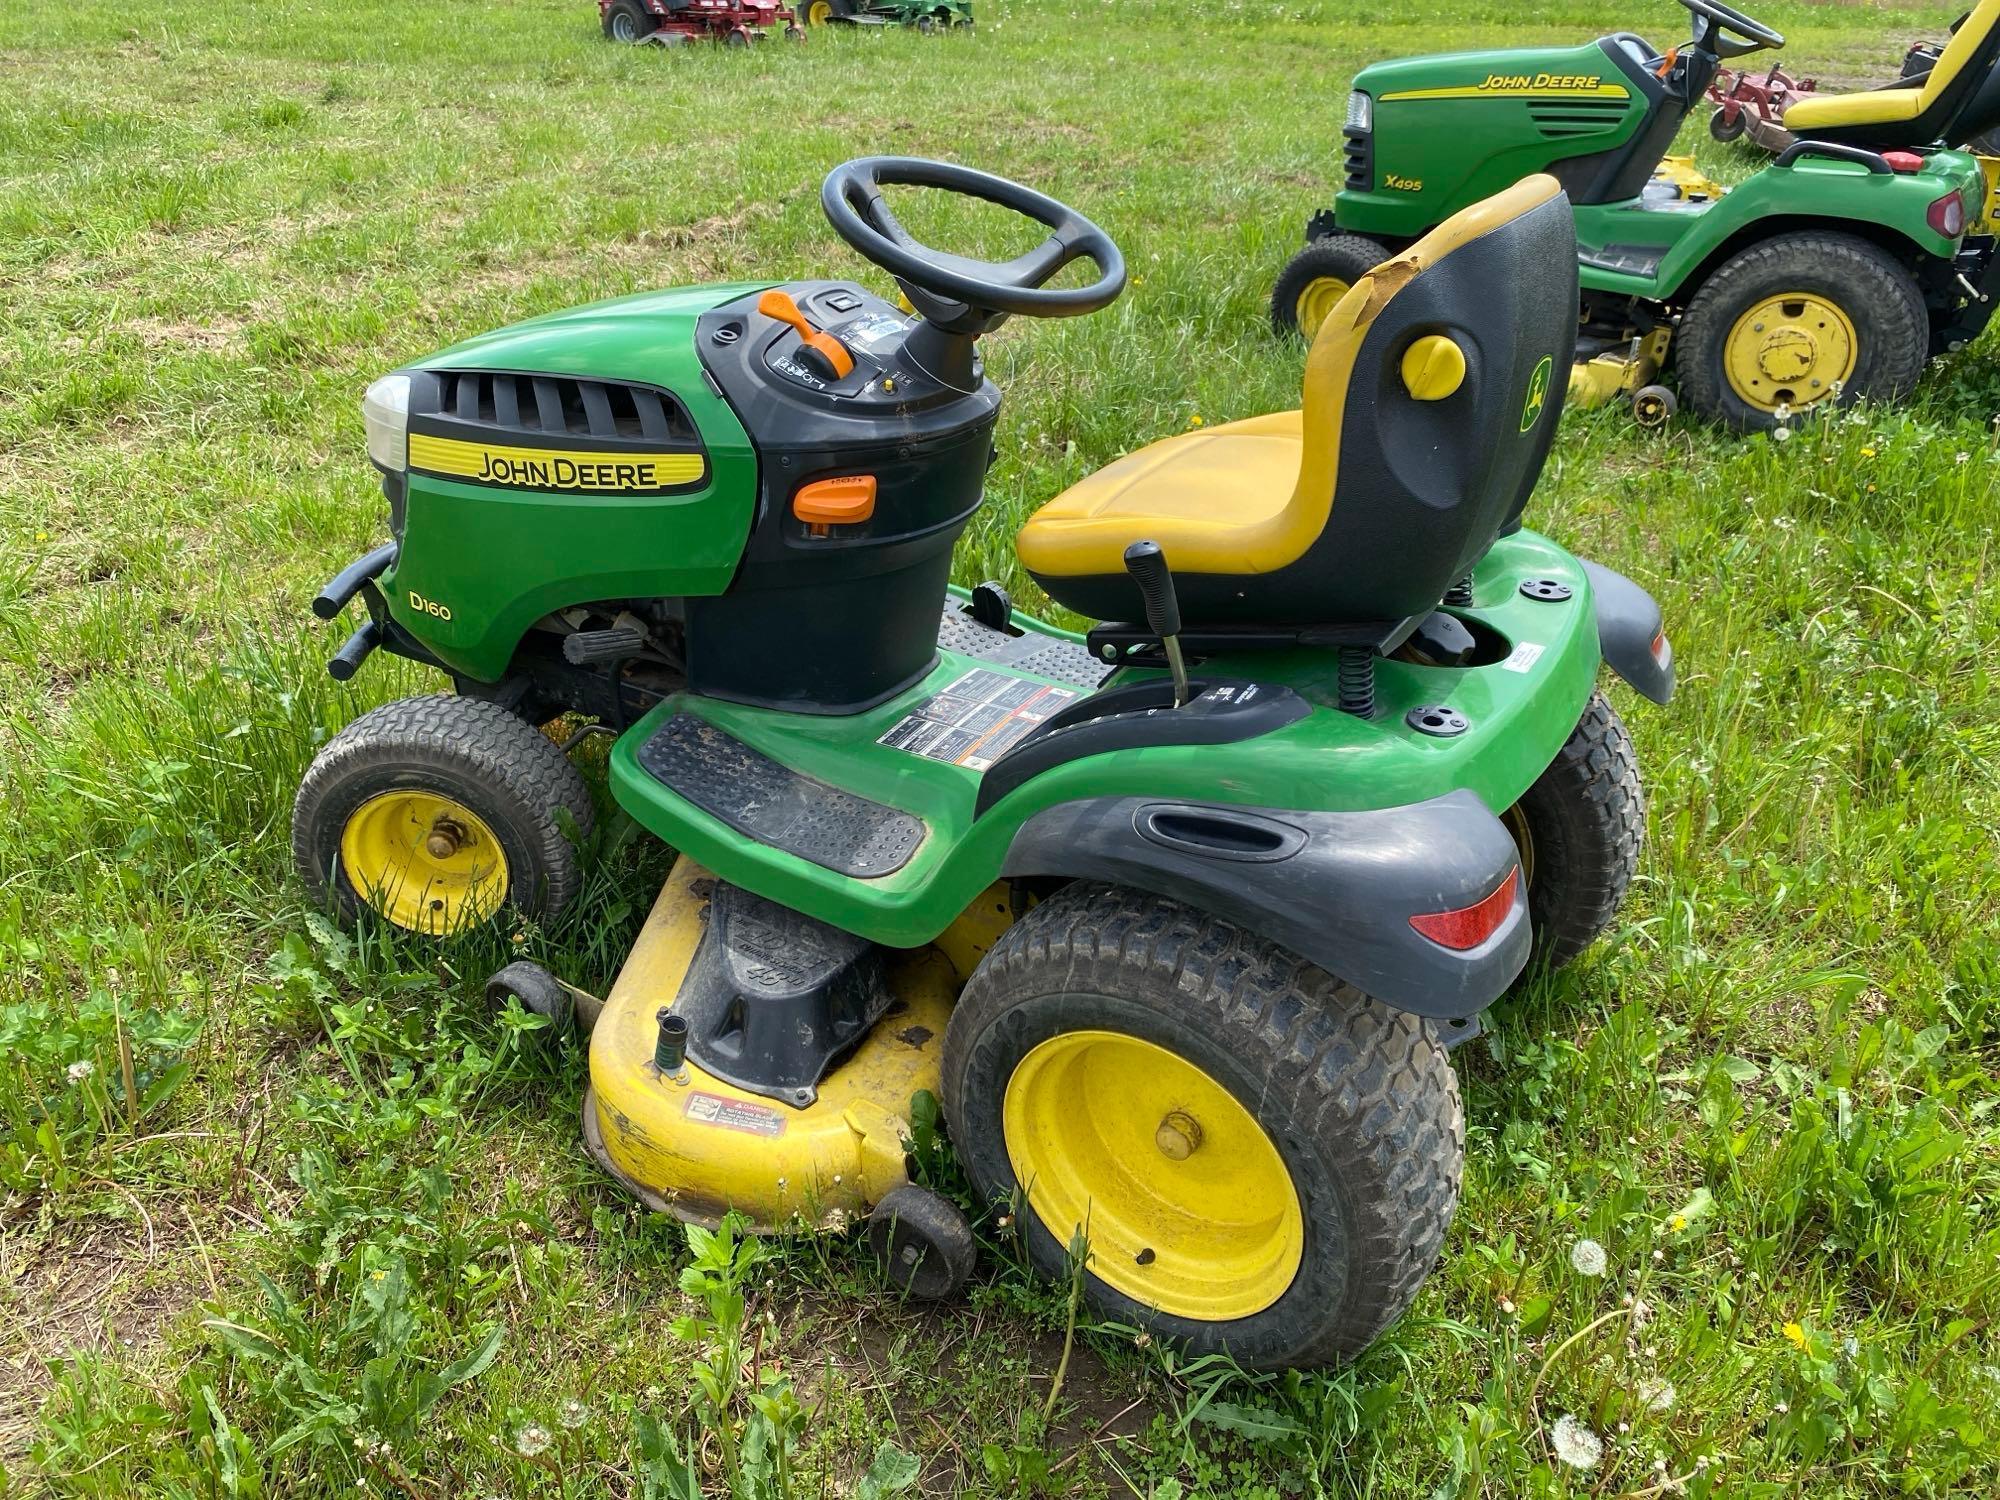 JOHN DEERE D160 LAWN & GARDEN TRACTOR powered by gas engine, equipped with 48in. cutting deck.